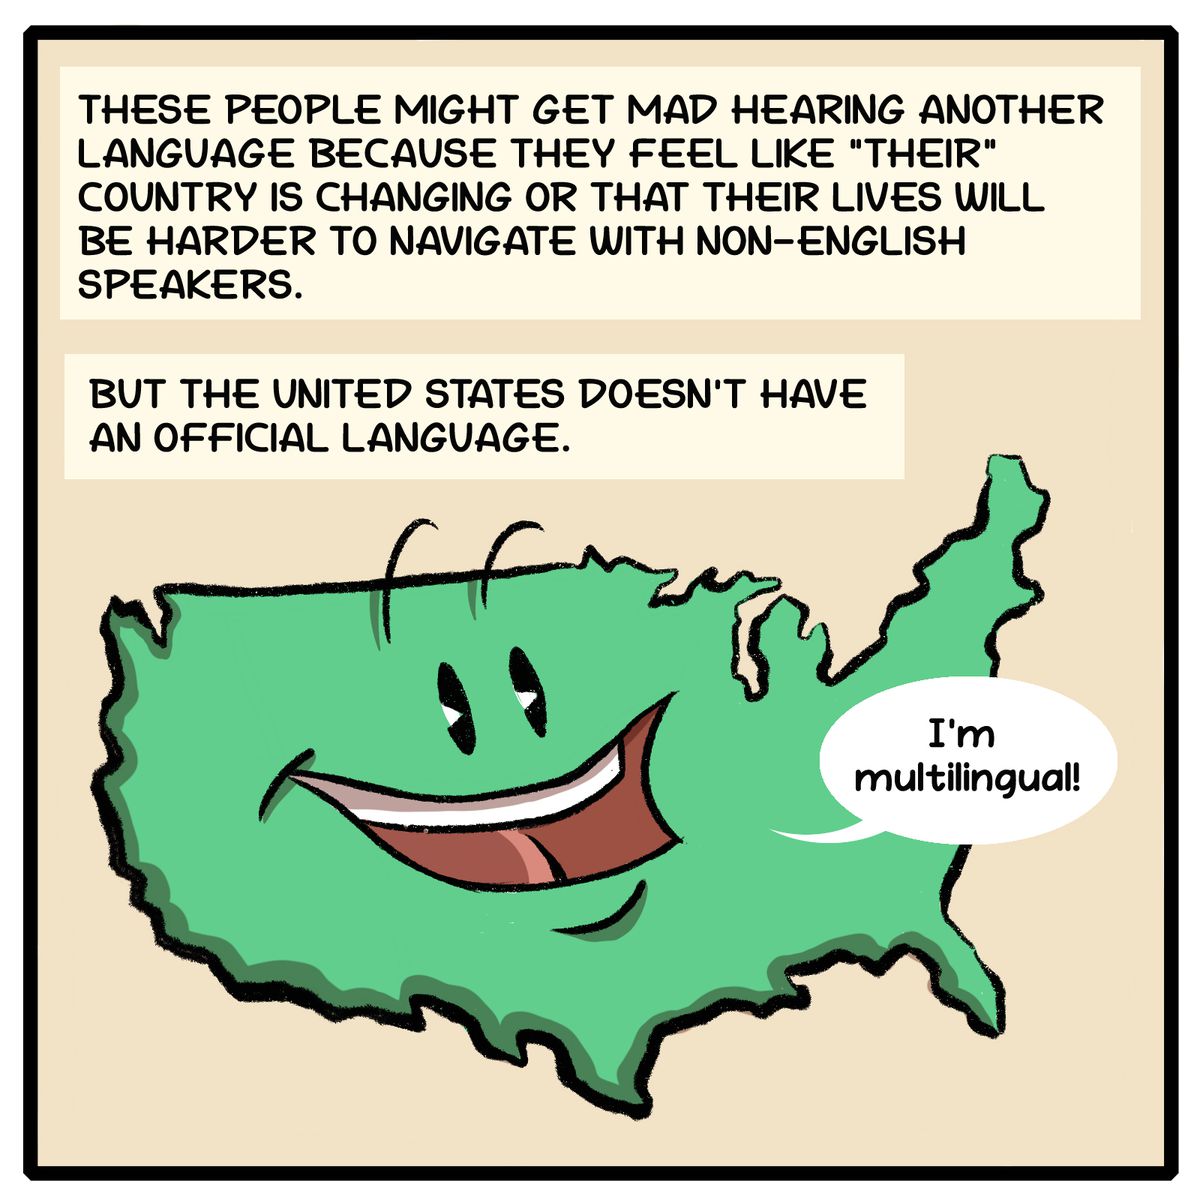 These people might get mad hearing another language because they feel like “their” country is changing or that their lives will be harder to navigate with non-English speakers. But the United States doesn’t have an official language.